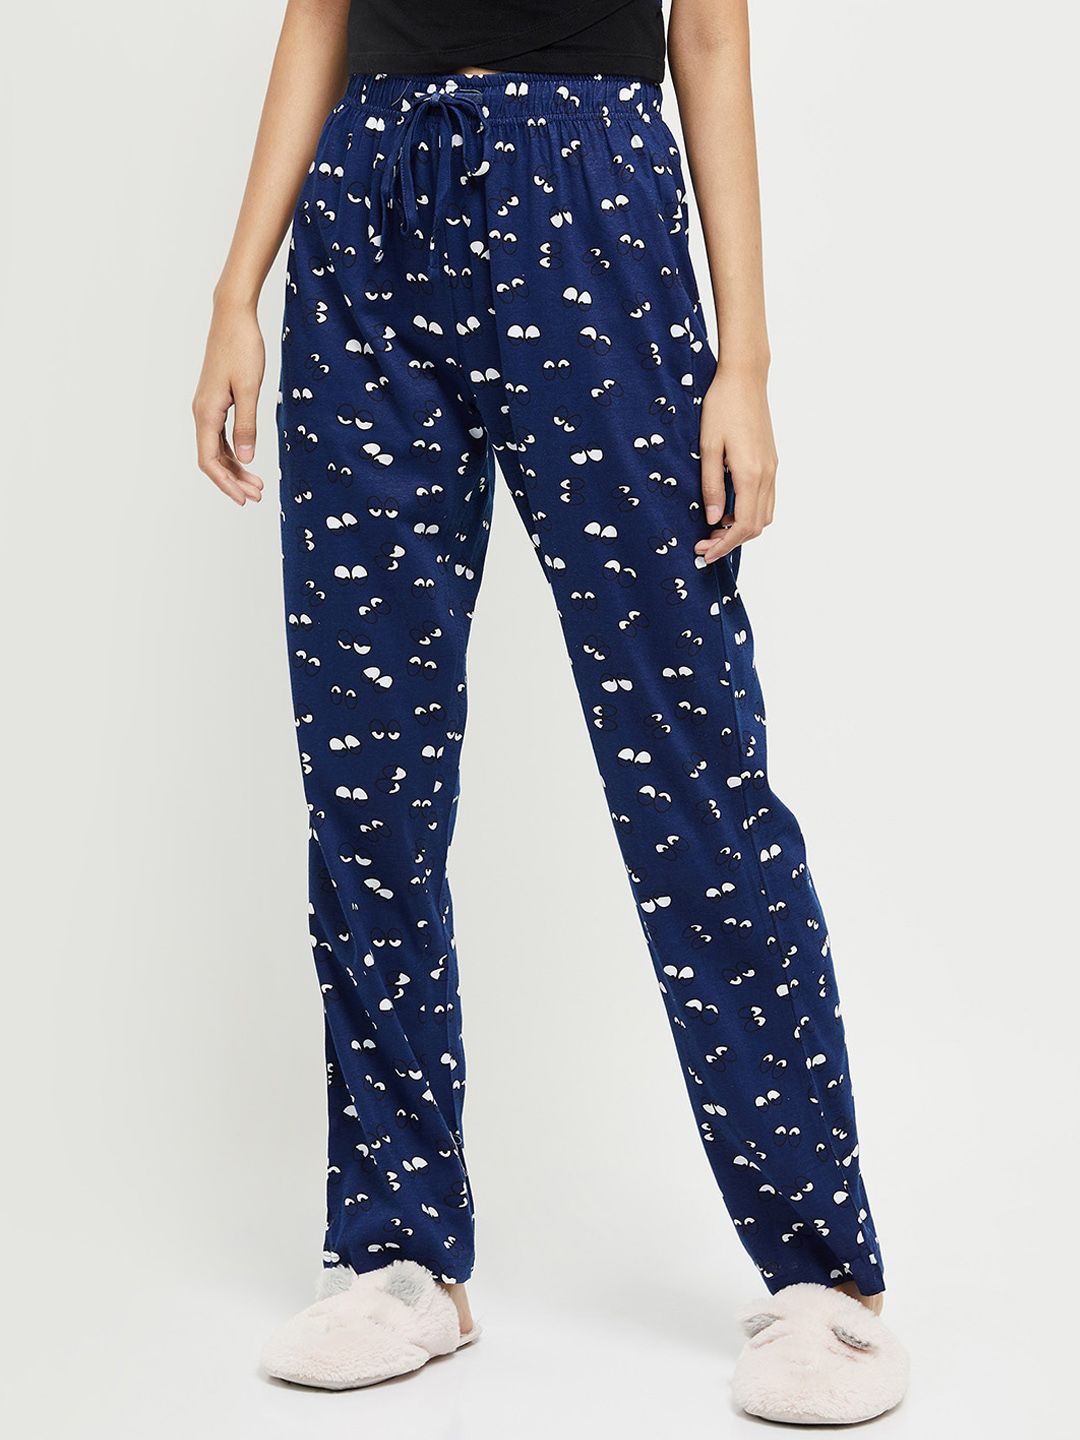 max Women Navy Blue Printed Pure Cotton Lounge Pant Price in India